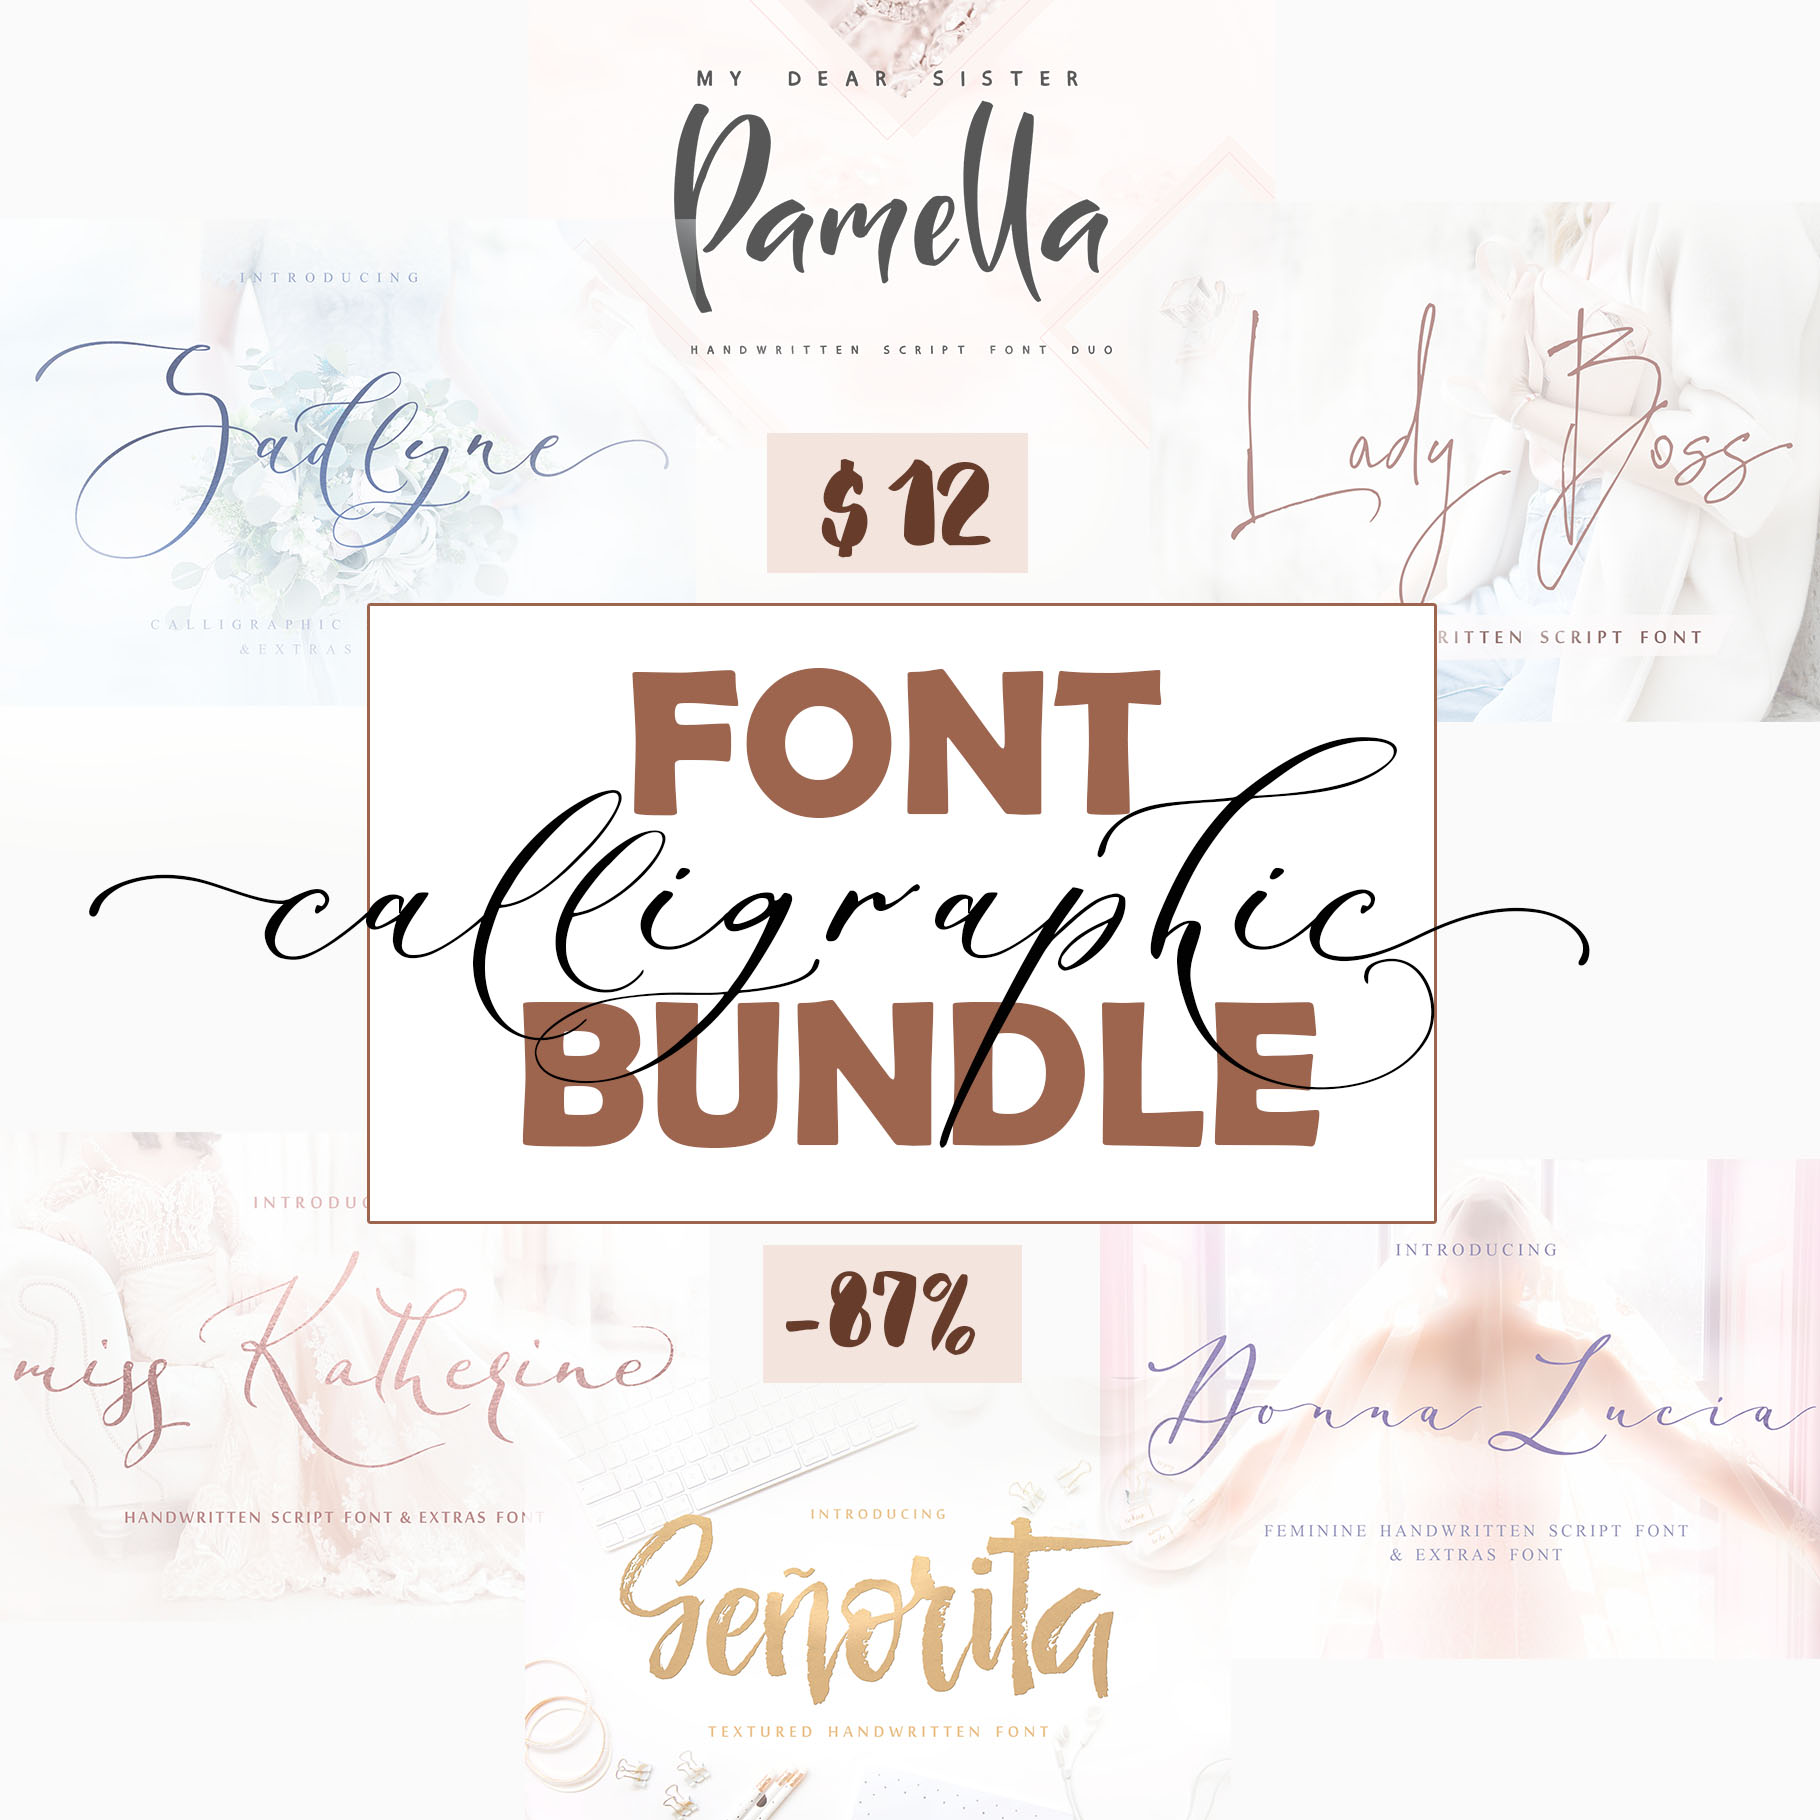 Calligraphy Font Bundle – $12 ONLY